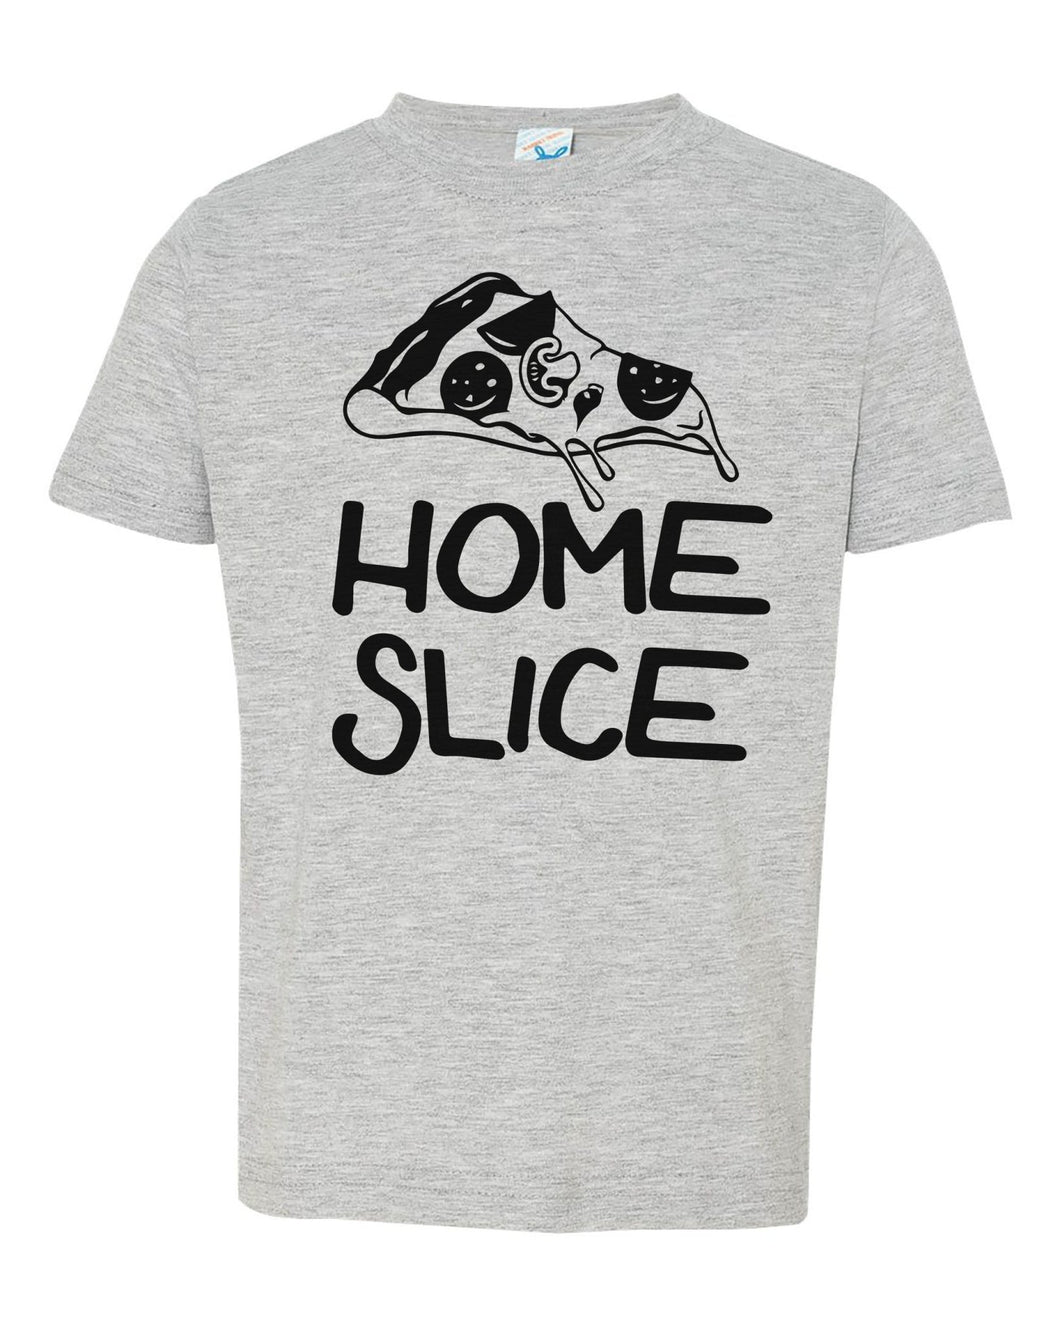 Home Slice / Toddler / Youth Crew Neck - Baffle